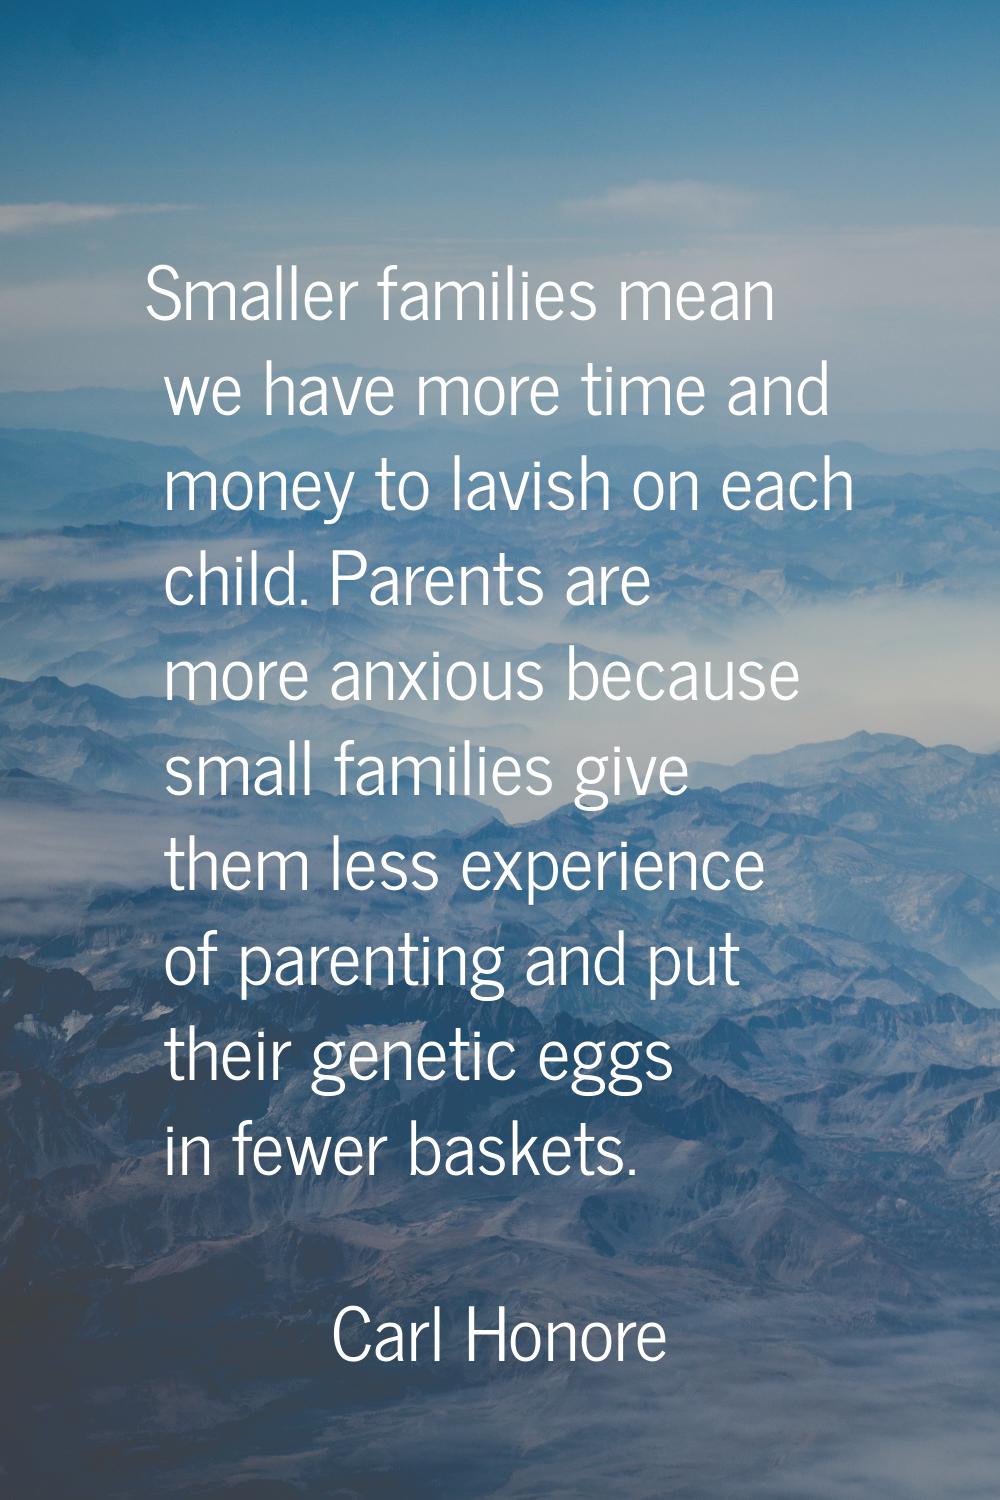 Smaller families mean we have more time and money to lavish on each child. Parents are more anxious